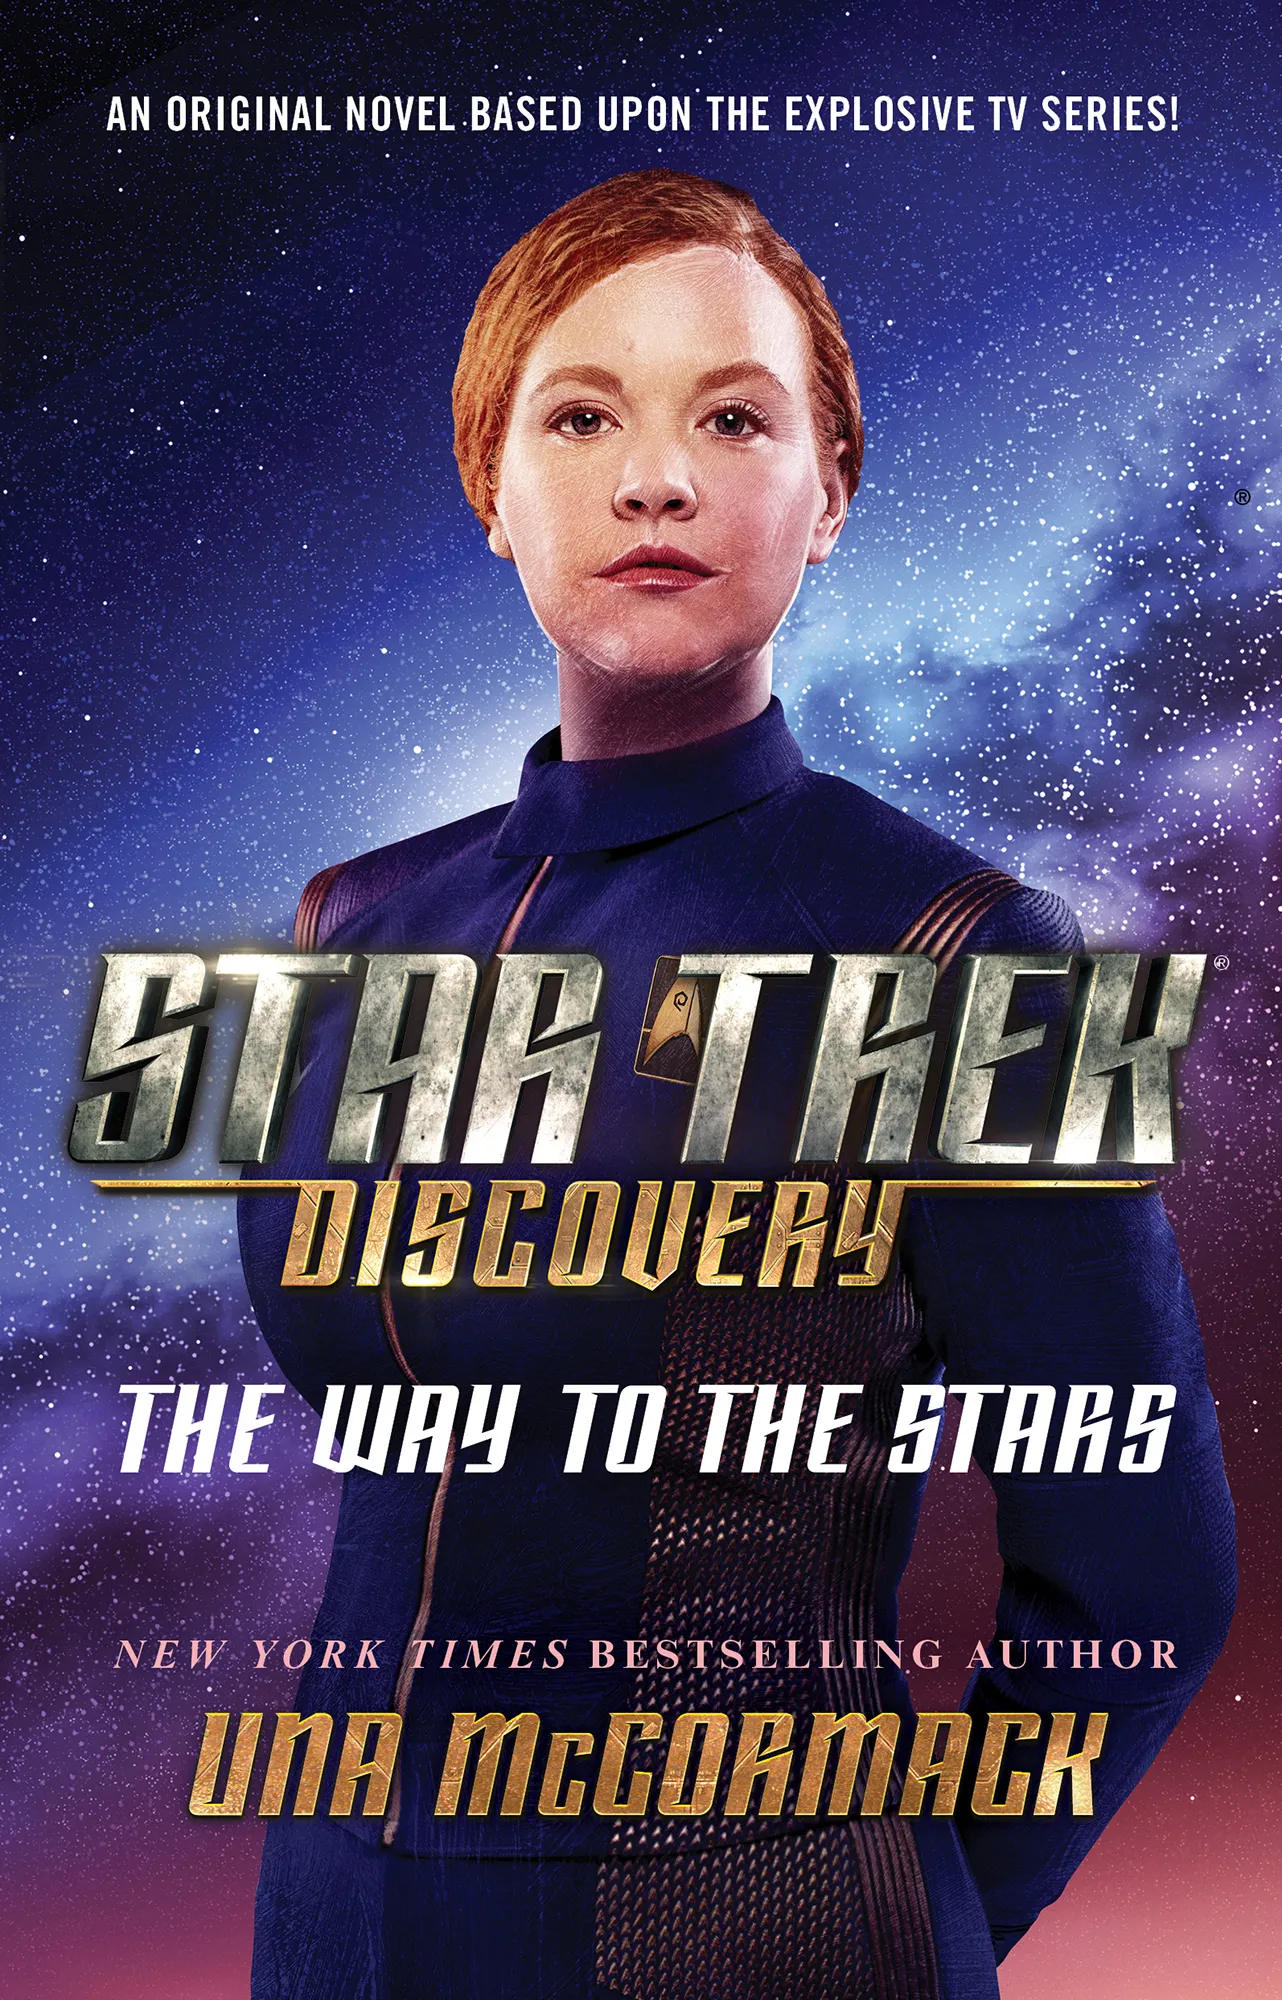 The Way to the Stars (Star Trek: Discovery #4)